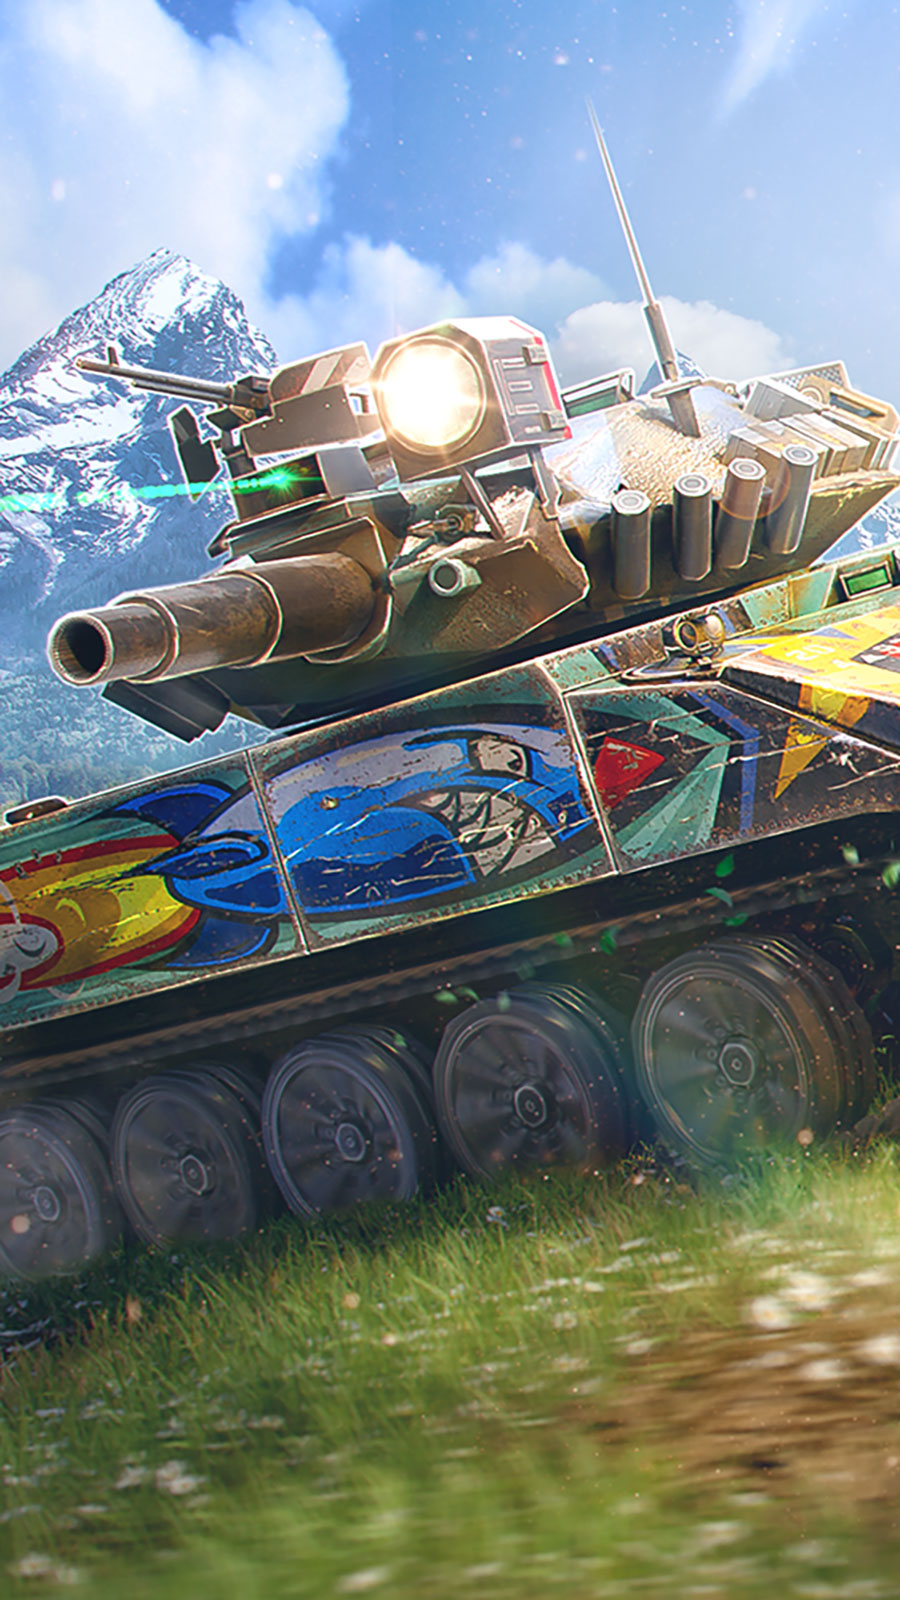 world of tanks blitz wallpapers Wallpapers